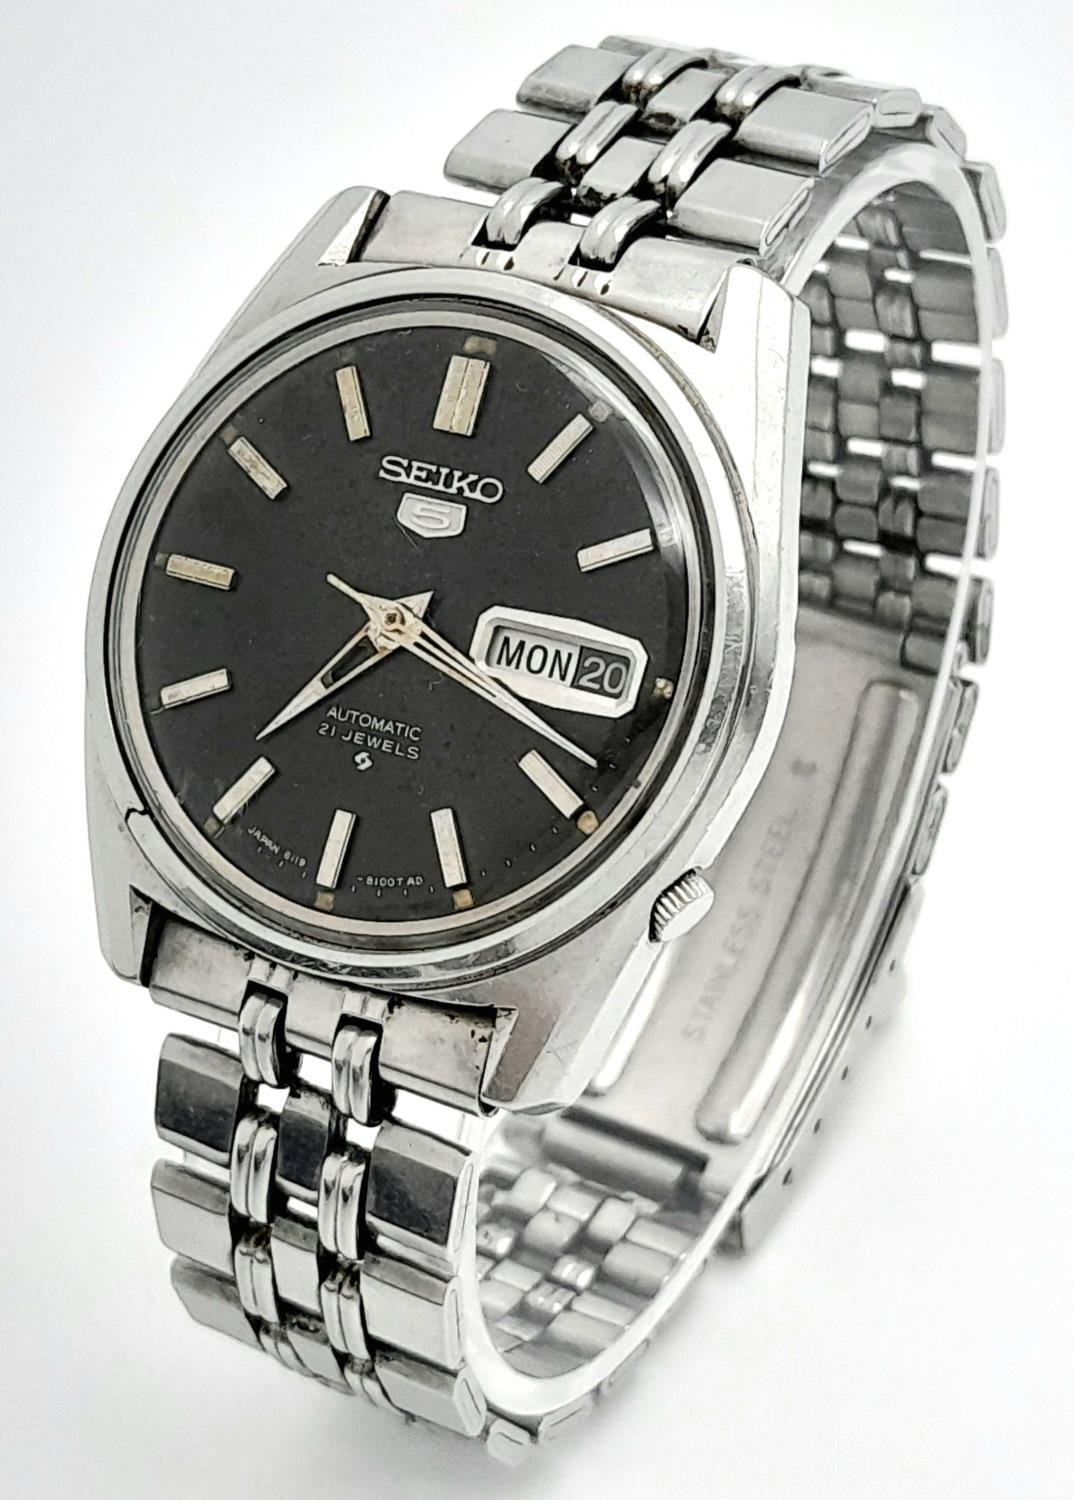 A Vintage Seiko 5 Automatic 21 Jewels Gents Watch. Stainless steel bracelet and case - 36mm. Black